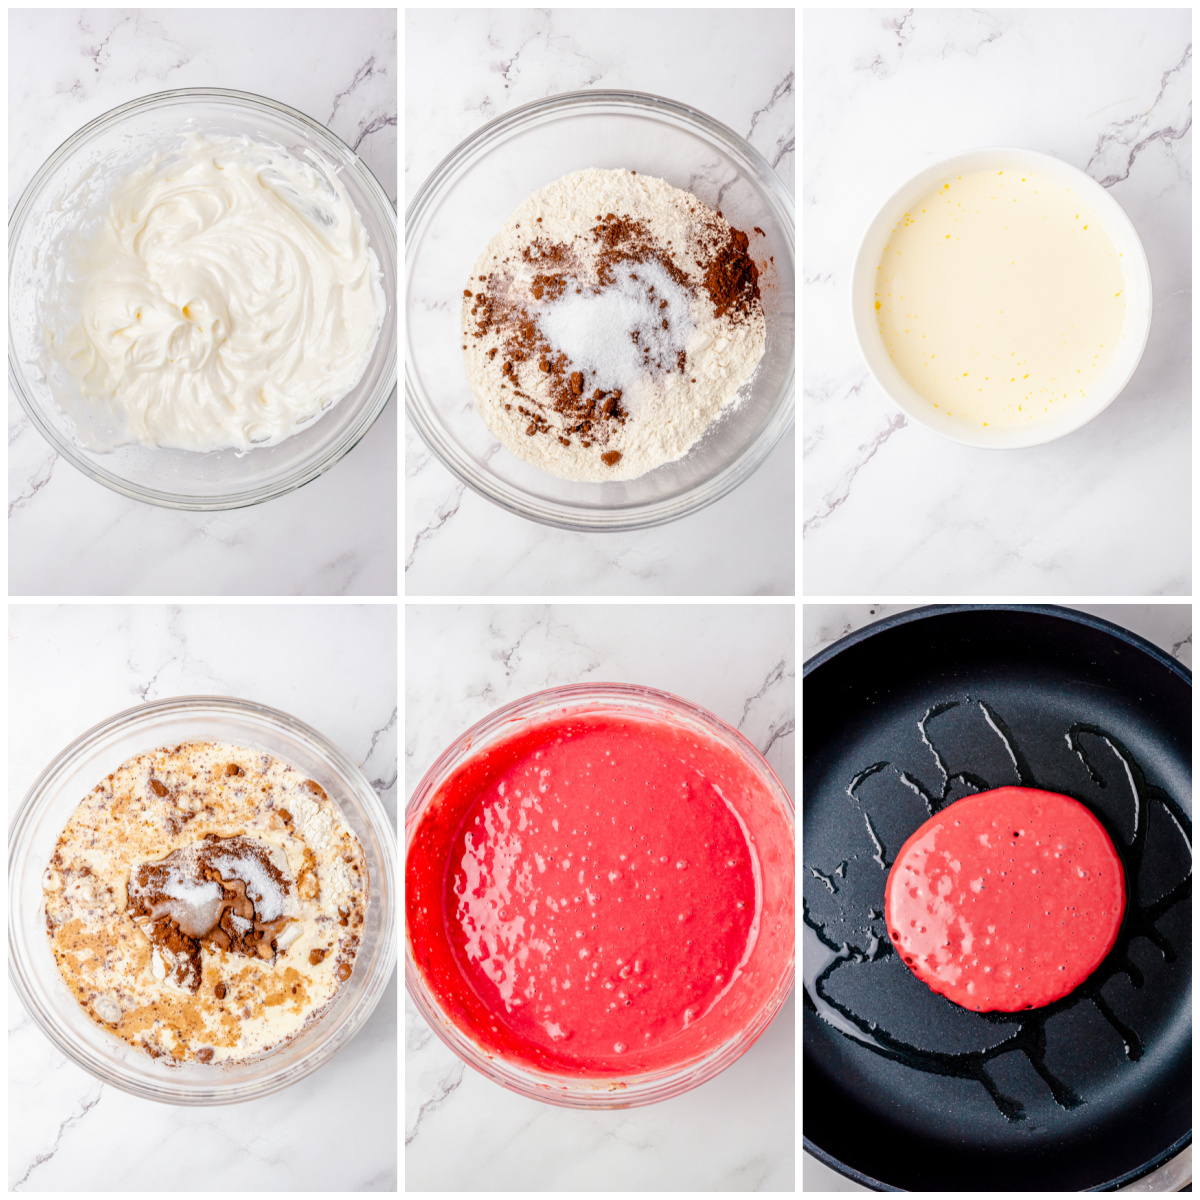 Step by step photos on how to make Red Velvet Pancakes.